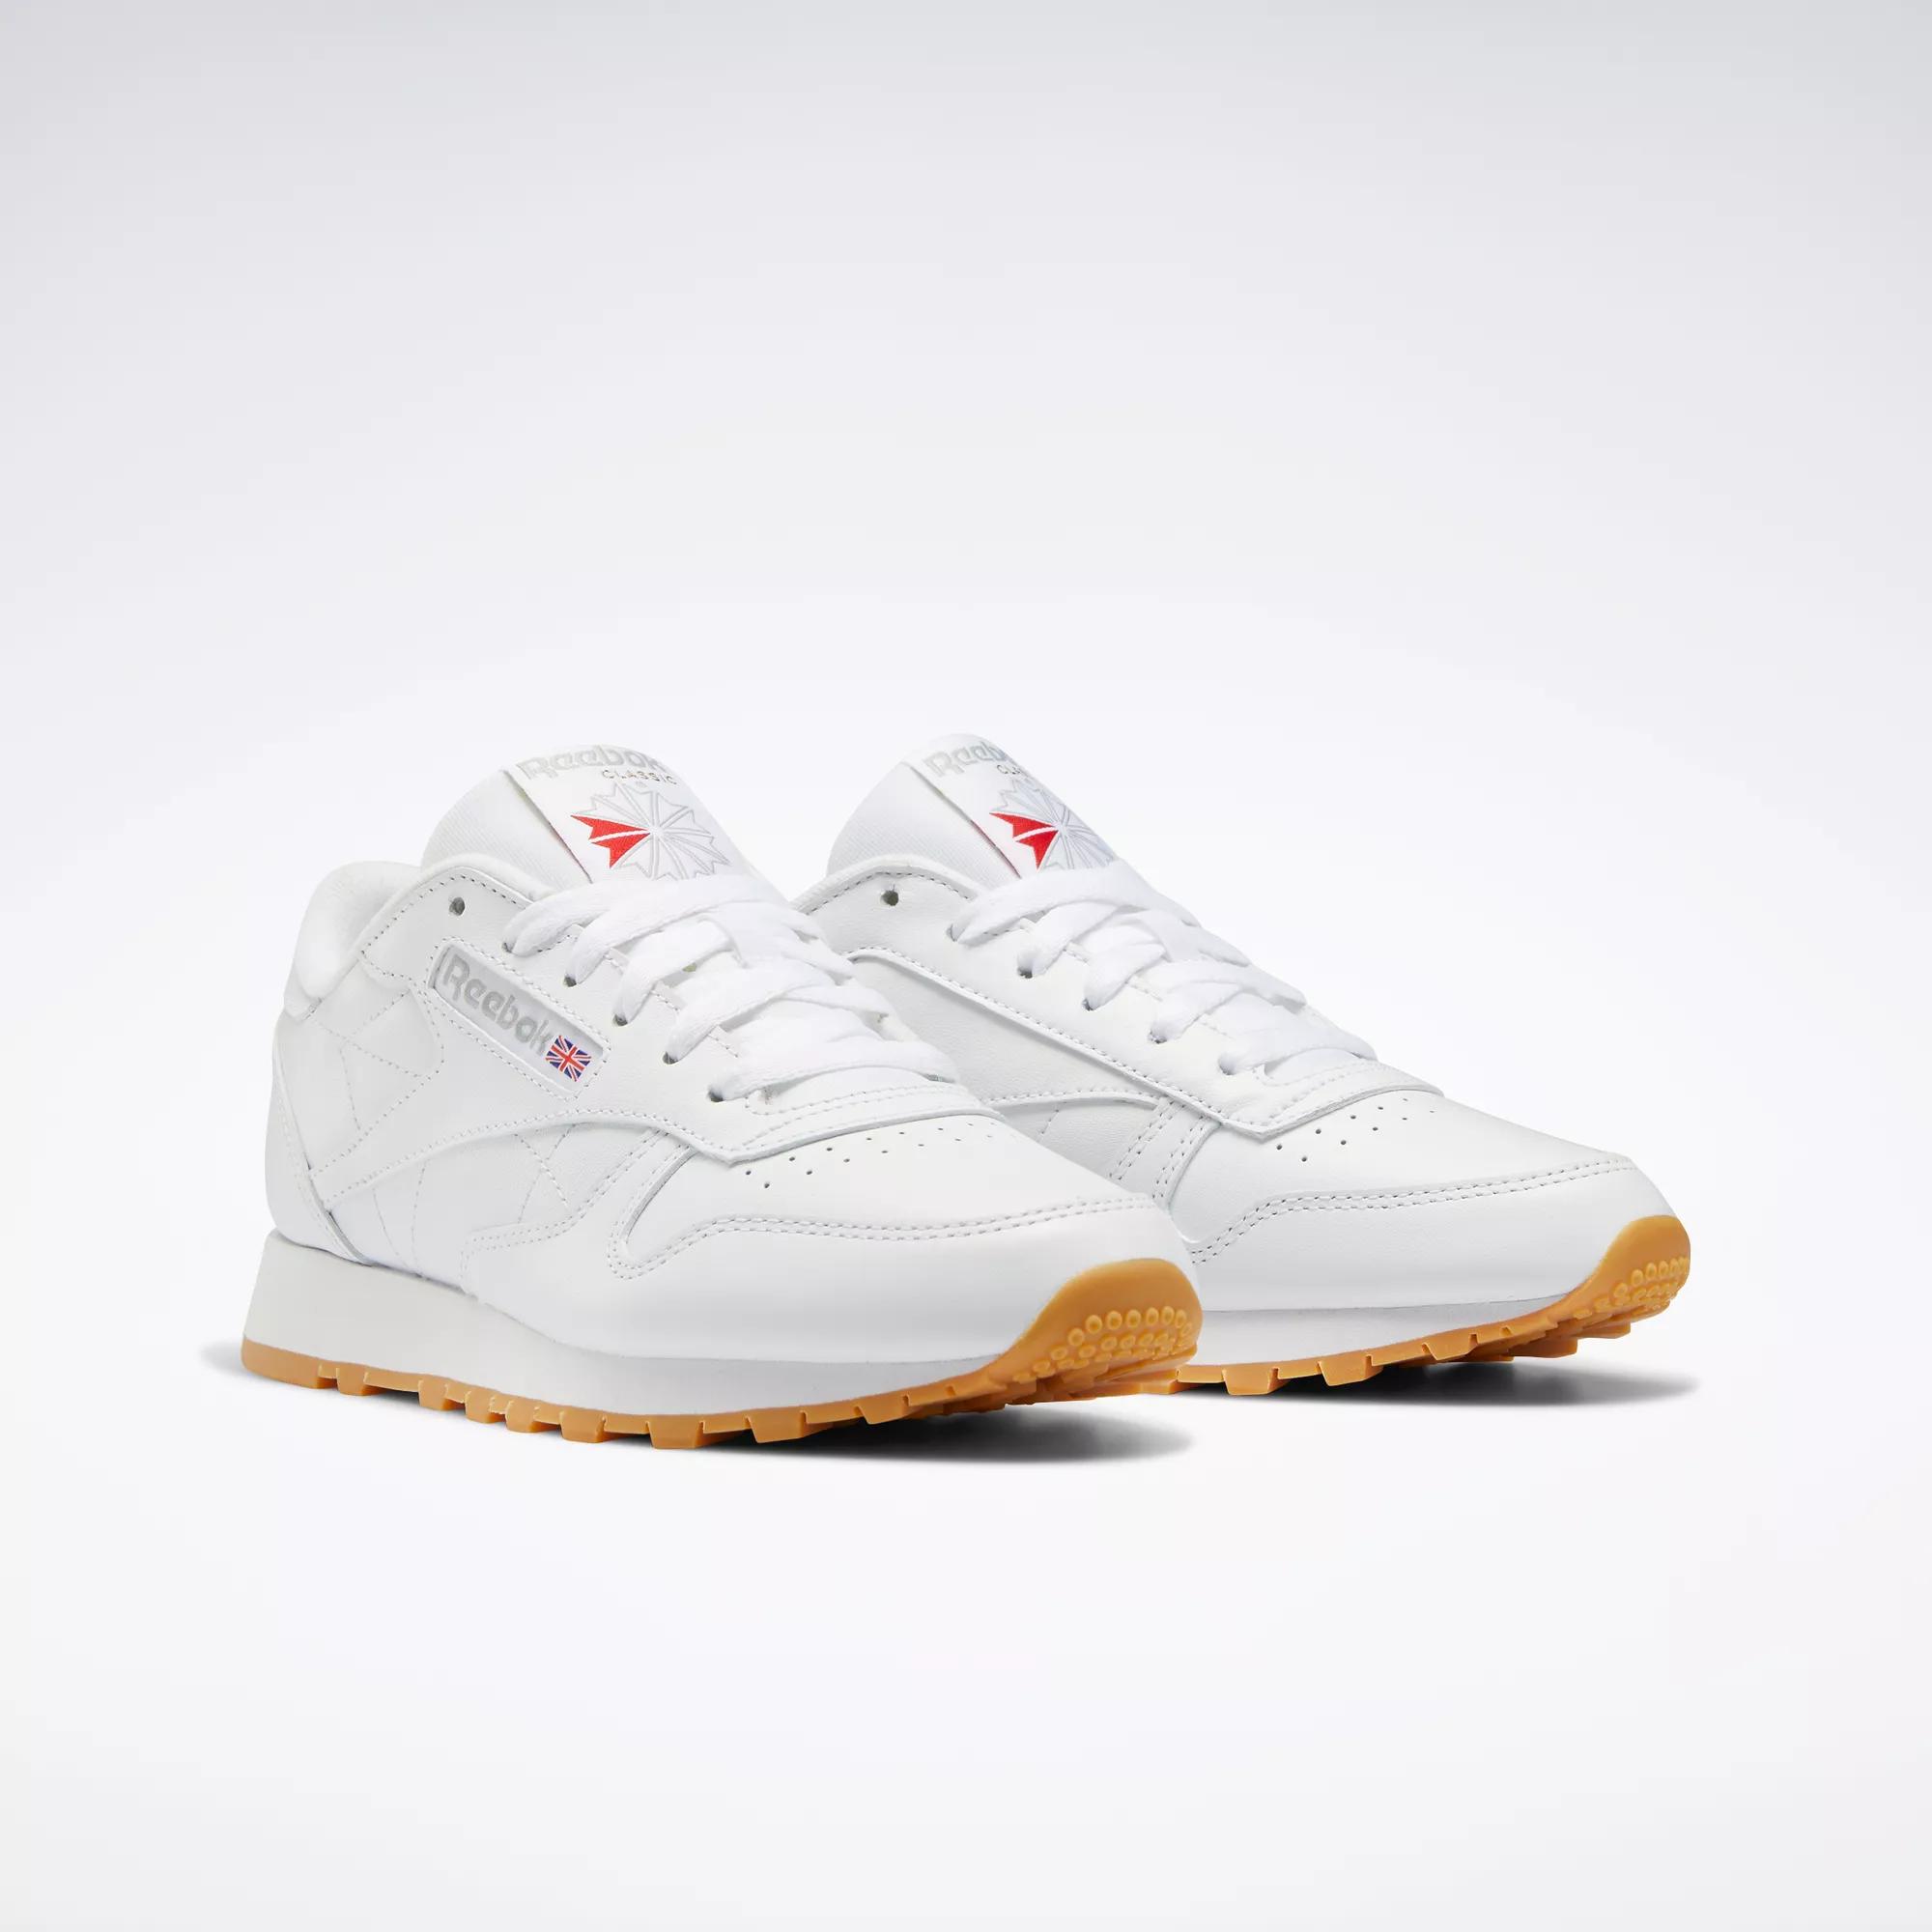 Classic Leather Shoes - Reebok Gum-03 White / Pure Ftwr / Grey Reebok Rubber 3 